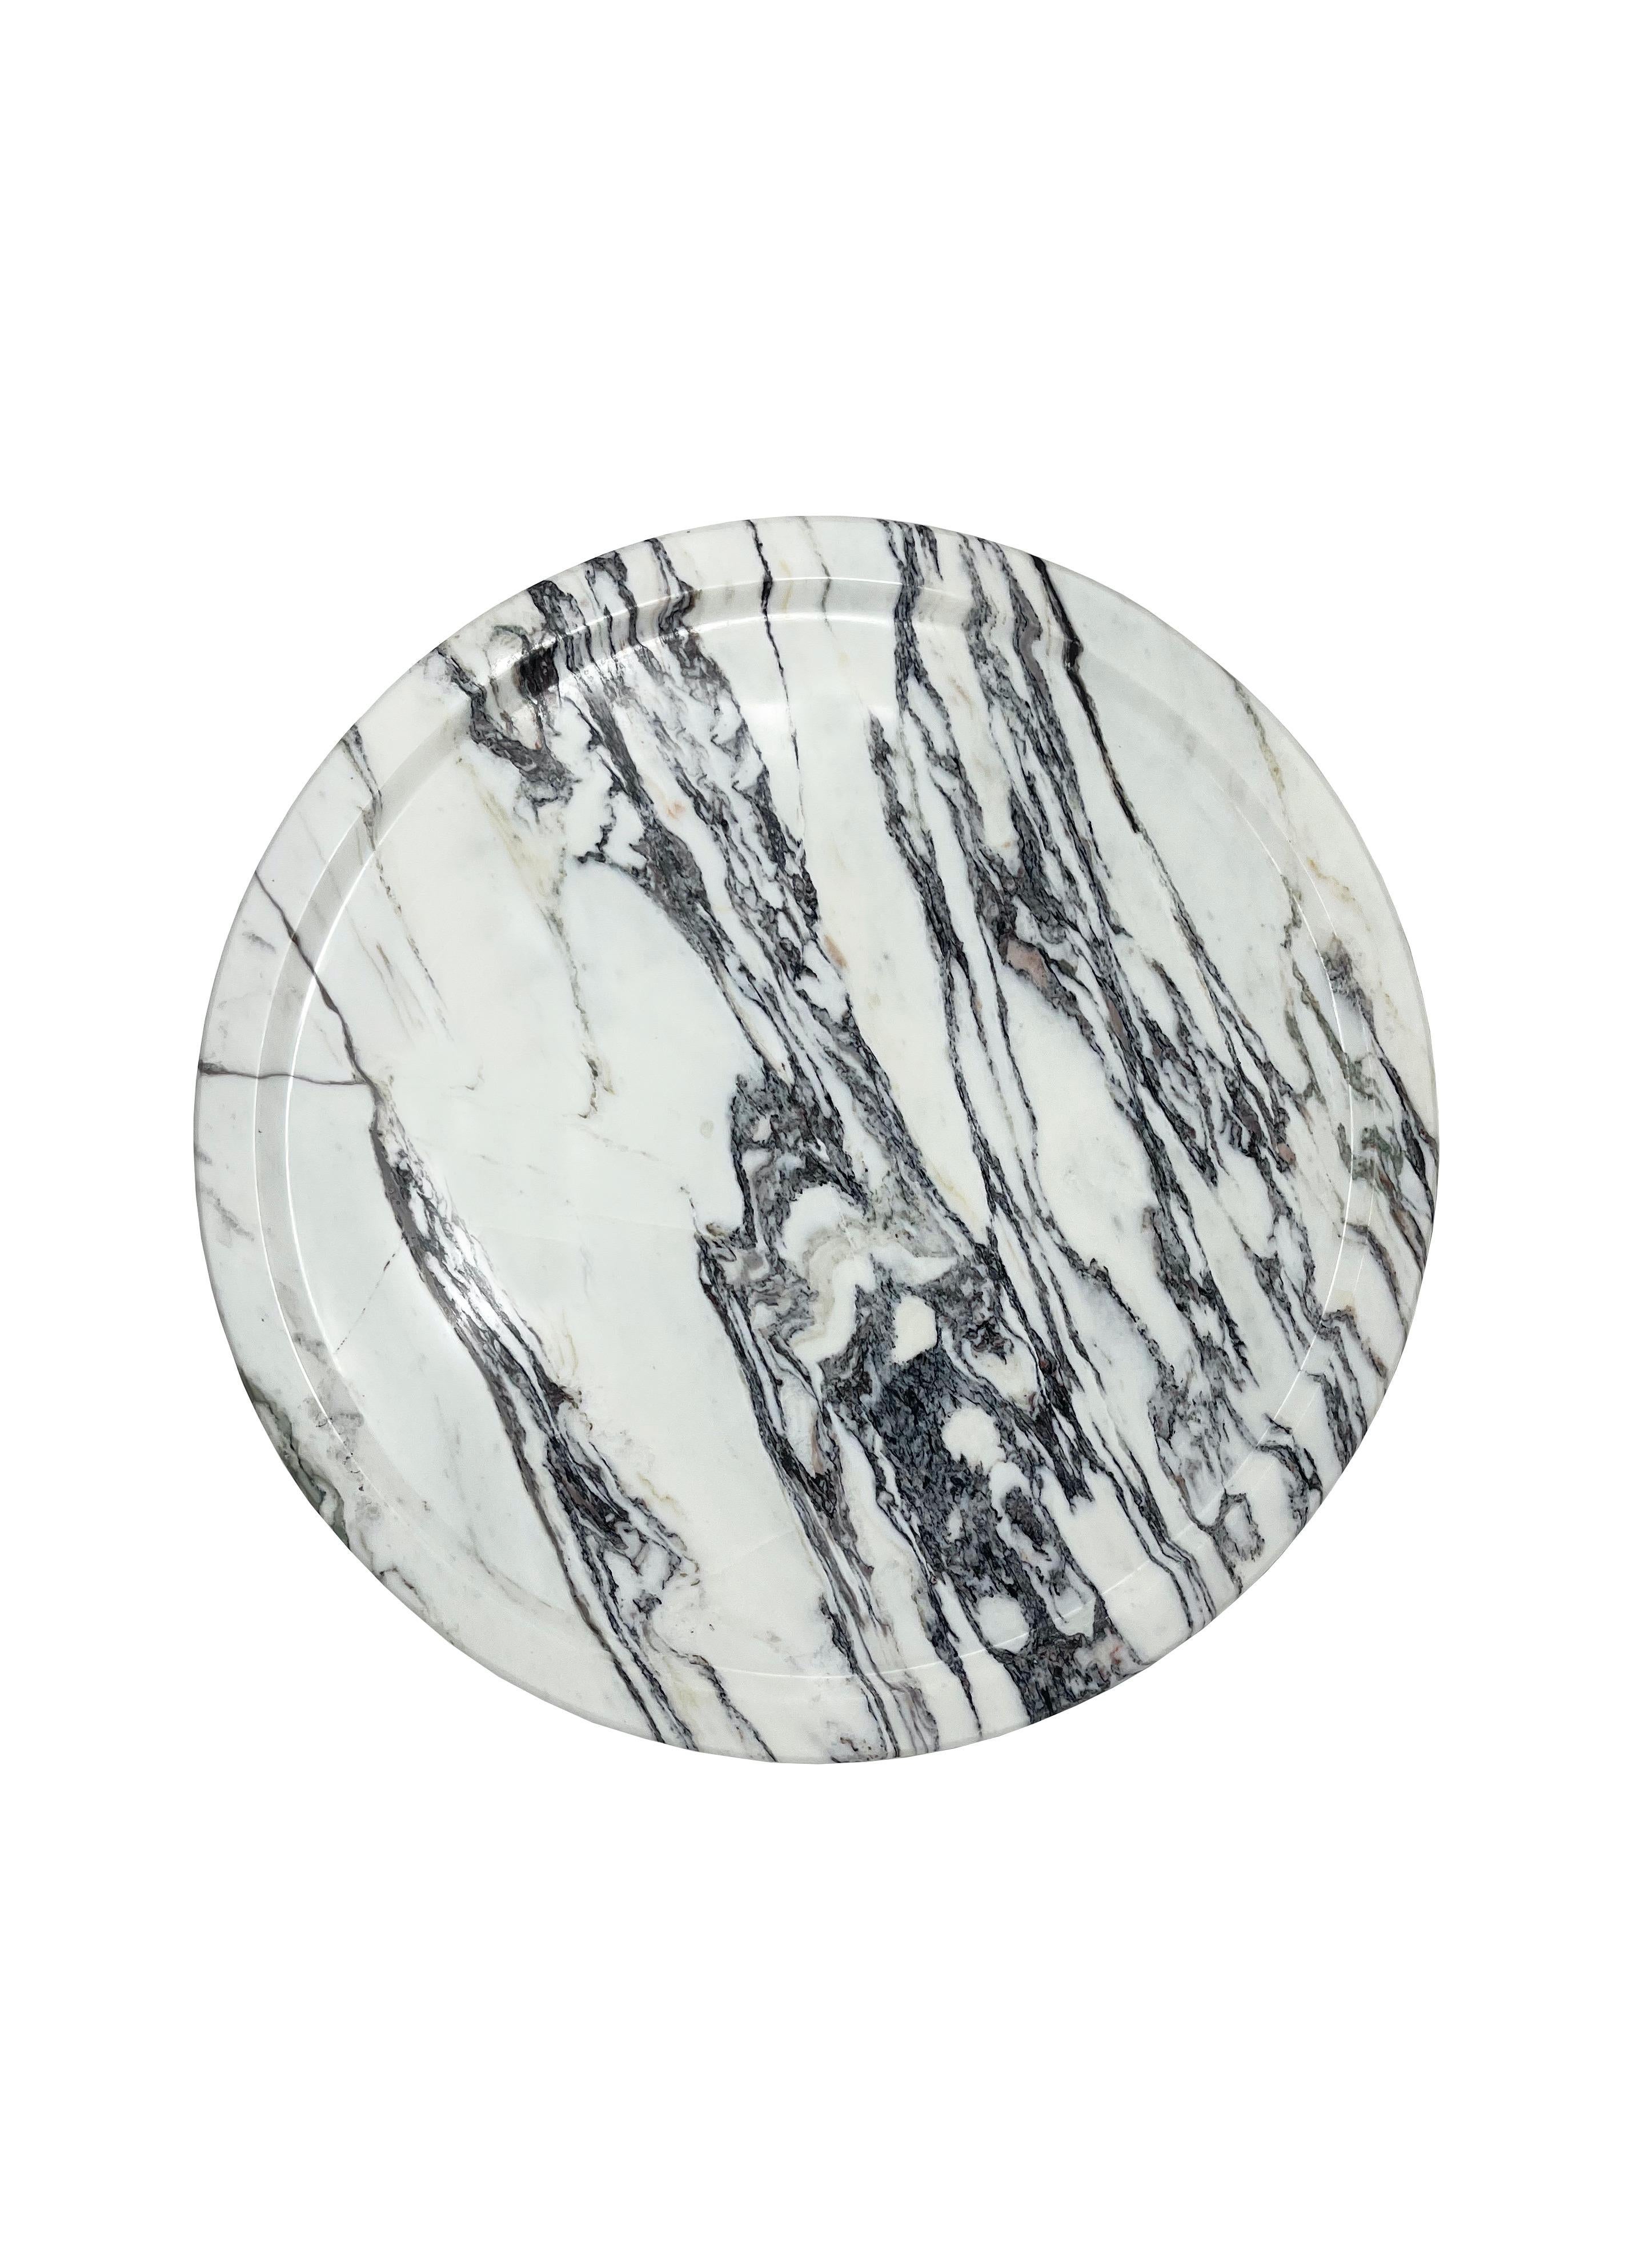 Made from a single circular piece of marble, Acqua is a modern, elegant and refined centrepiece. The Acqua marble tray is perfect for the dining table, kitchen countertop or coffee table.

Acqua can also be used as a serving plate to be placed